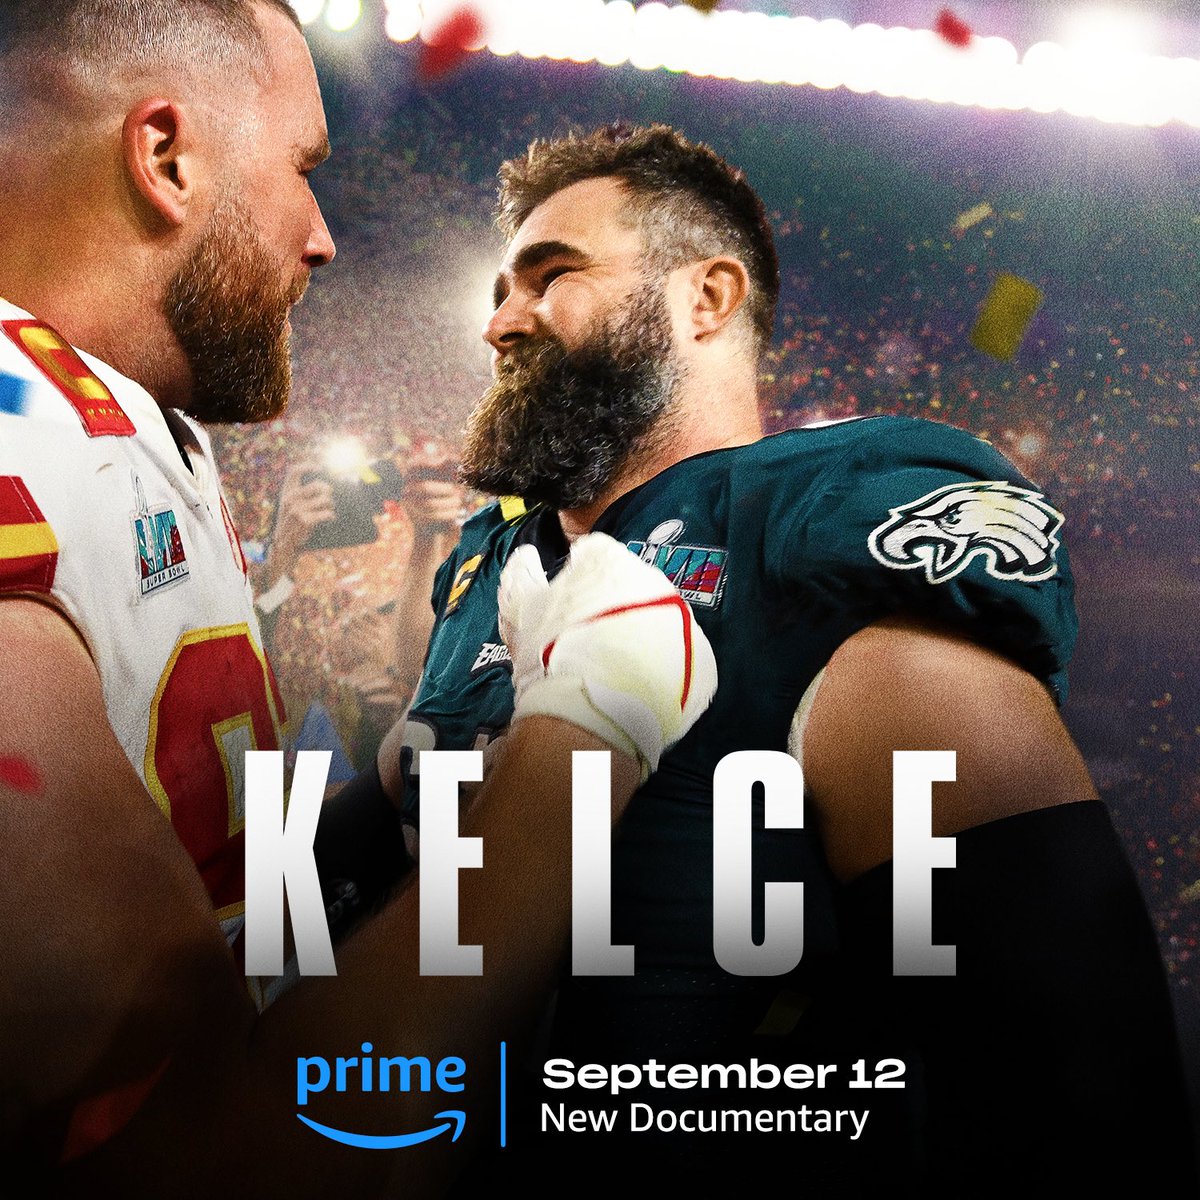 Two years ago Kelce and I started something and didn’t know where it would go. It turned out better than I ever imagined and can’t wait for you all to see it on @PrimeVideo!